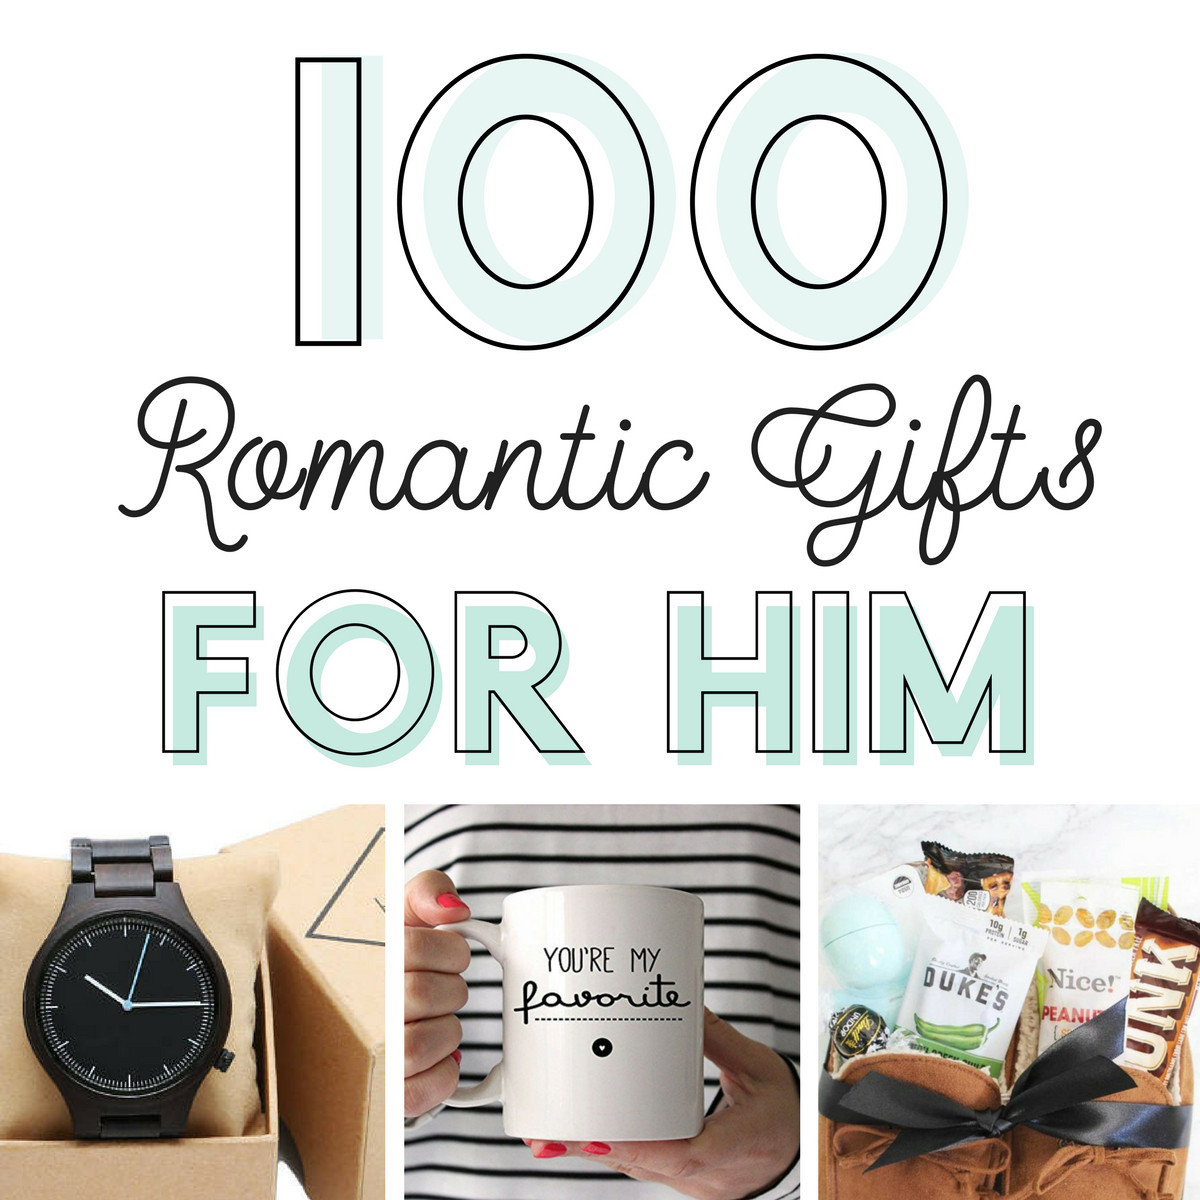 20 Of the Best Ideas for Anniversary Gift Ideas for Guys Home, Family